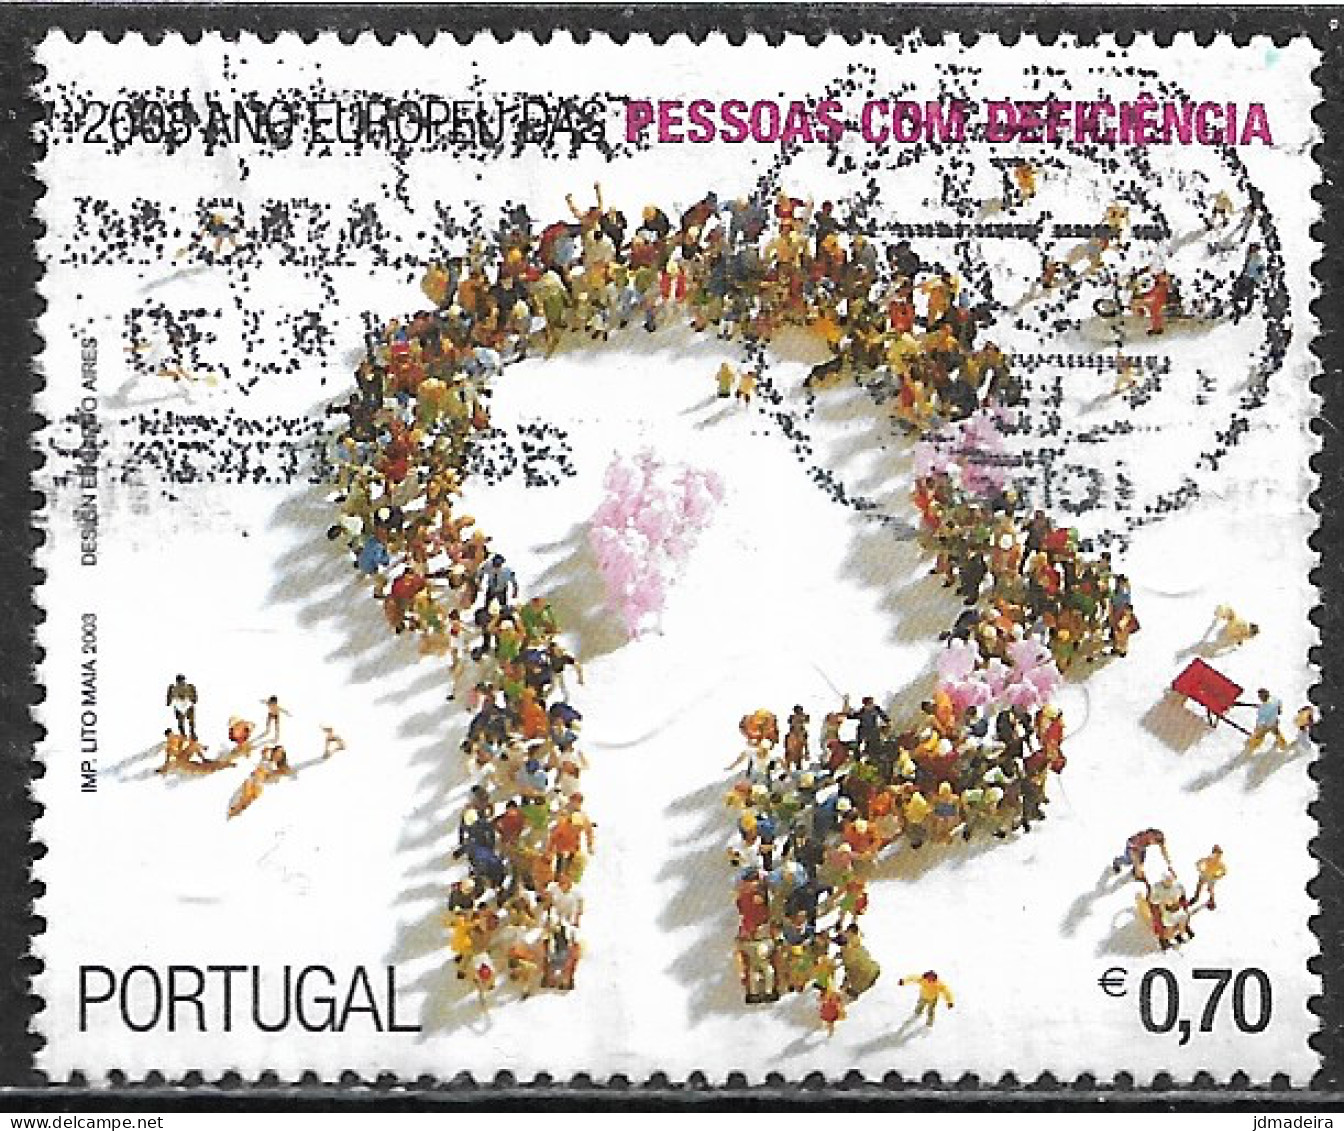 Portugal – 2003 Disabled People 0,70 Used Stamp - Usati